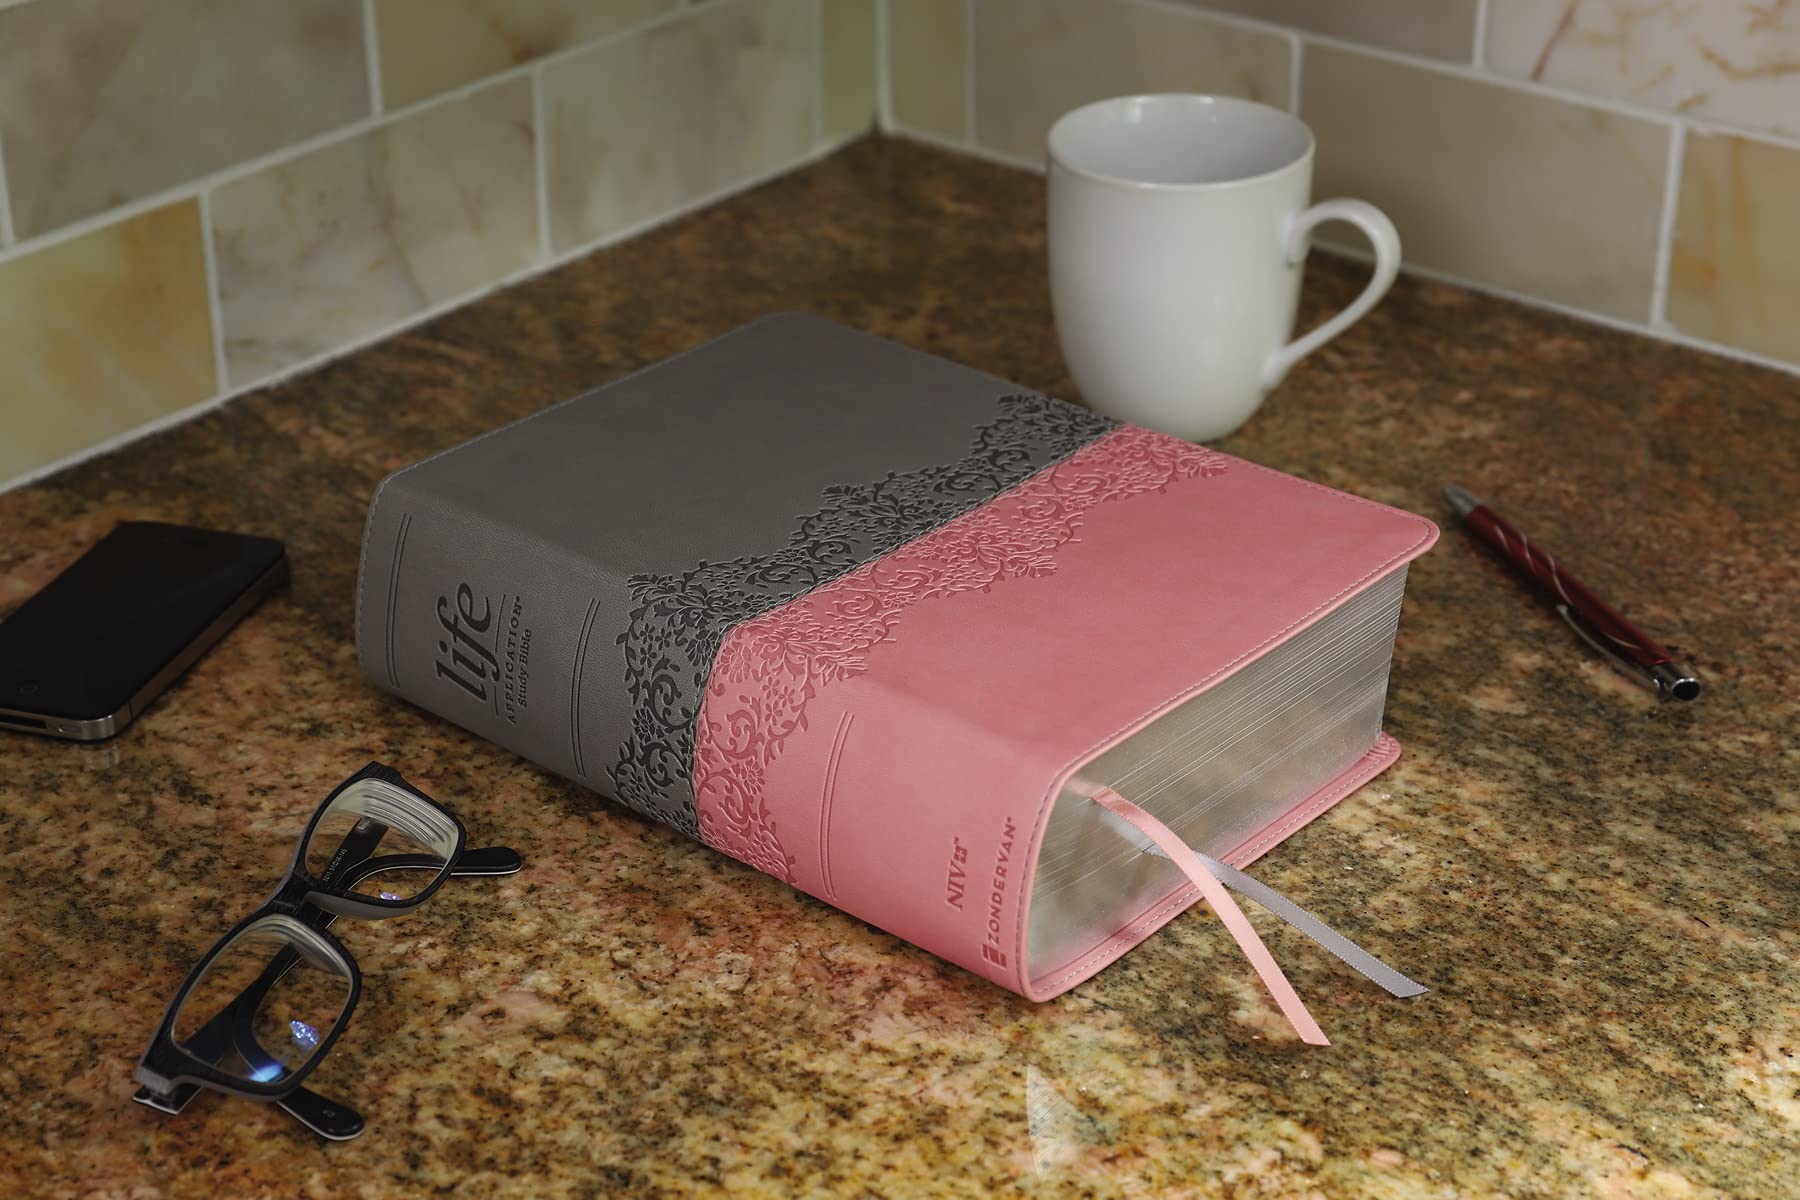 NIV, Life Application Study Bible, Third Edition, Large Print, Leathersoft, Gray/Pink, Red Letter